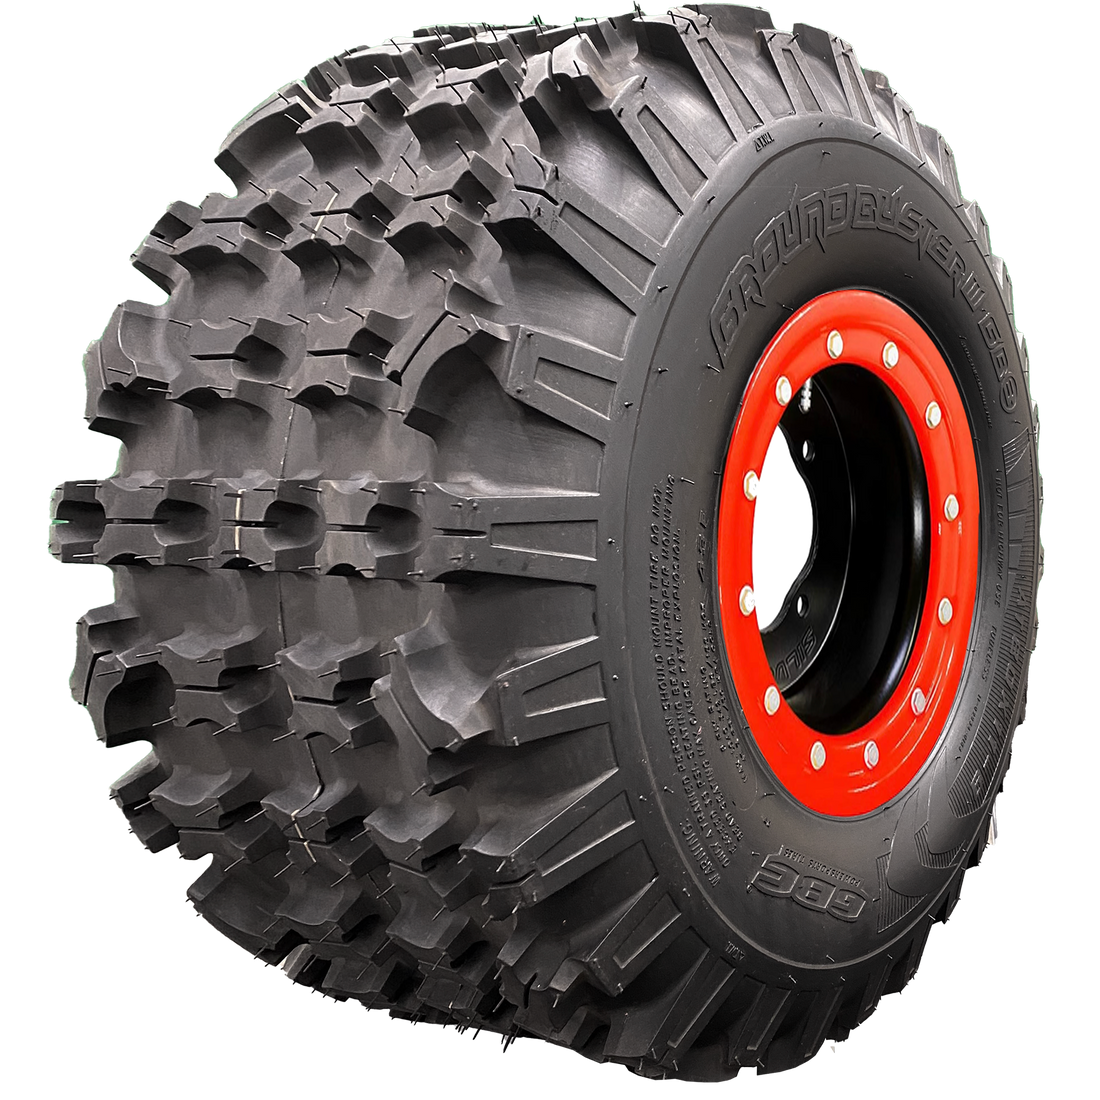 Angle view of Ground Buster 3 ATV tire, exhibiting the tread, a section of the sidewall, and the rim. This image reveals the tire's non-directional sipped X-knob tread pattern for maximum flexibility. The hefty sidewall lugs ensure optimum cornering traction and control, perfect for intermediate to hard terrain racing.